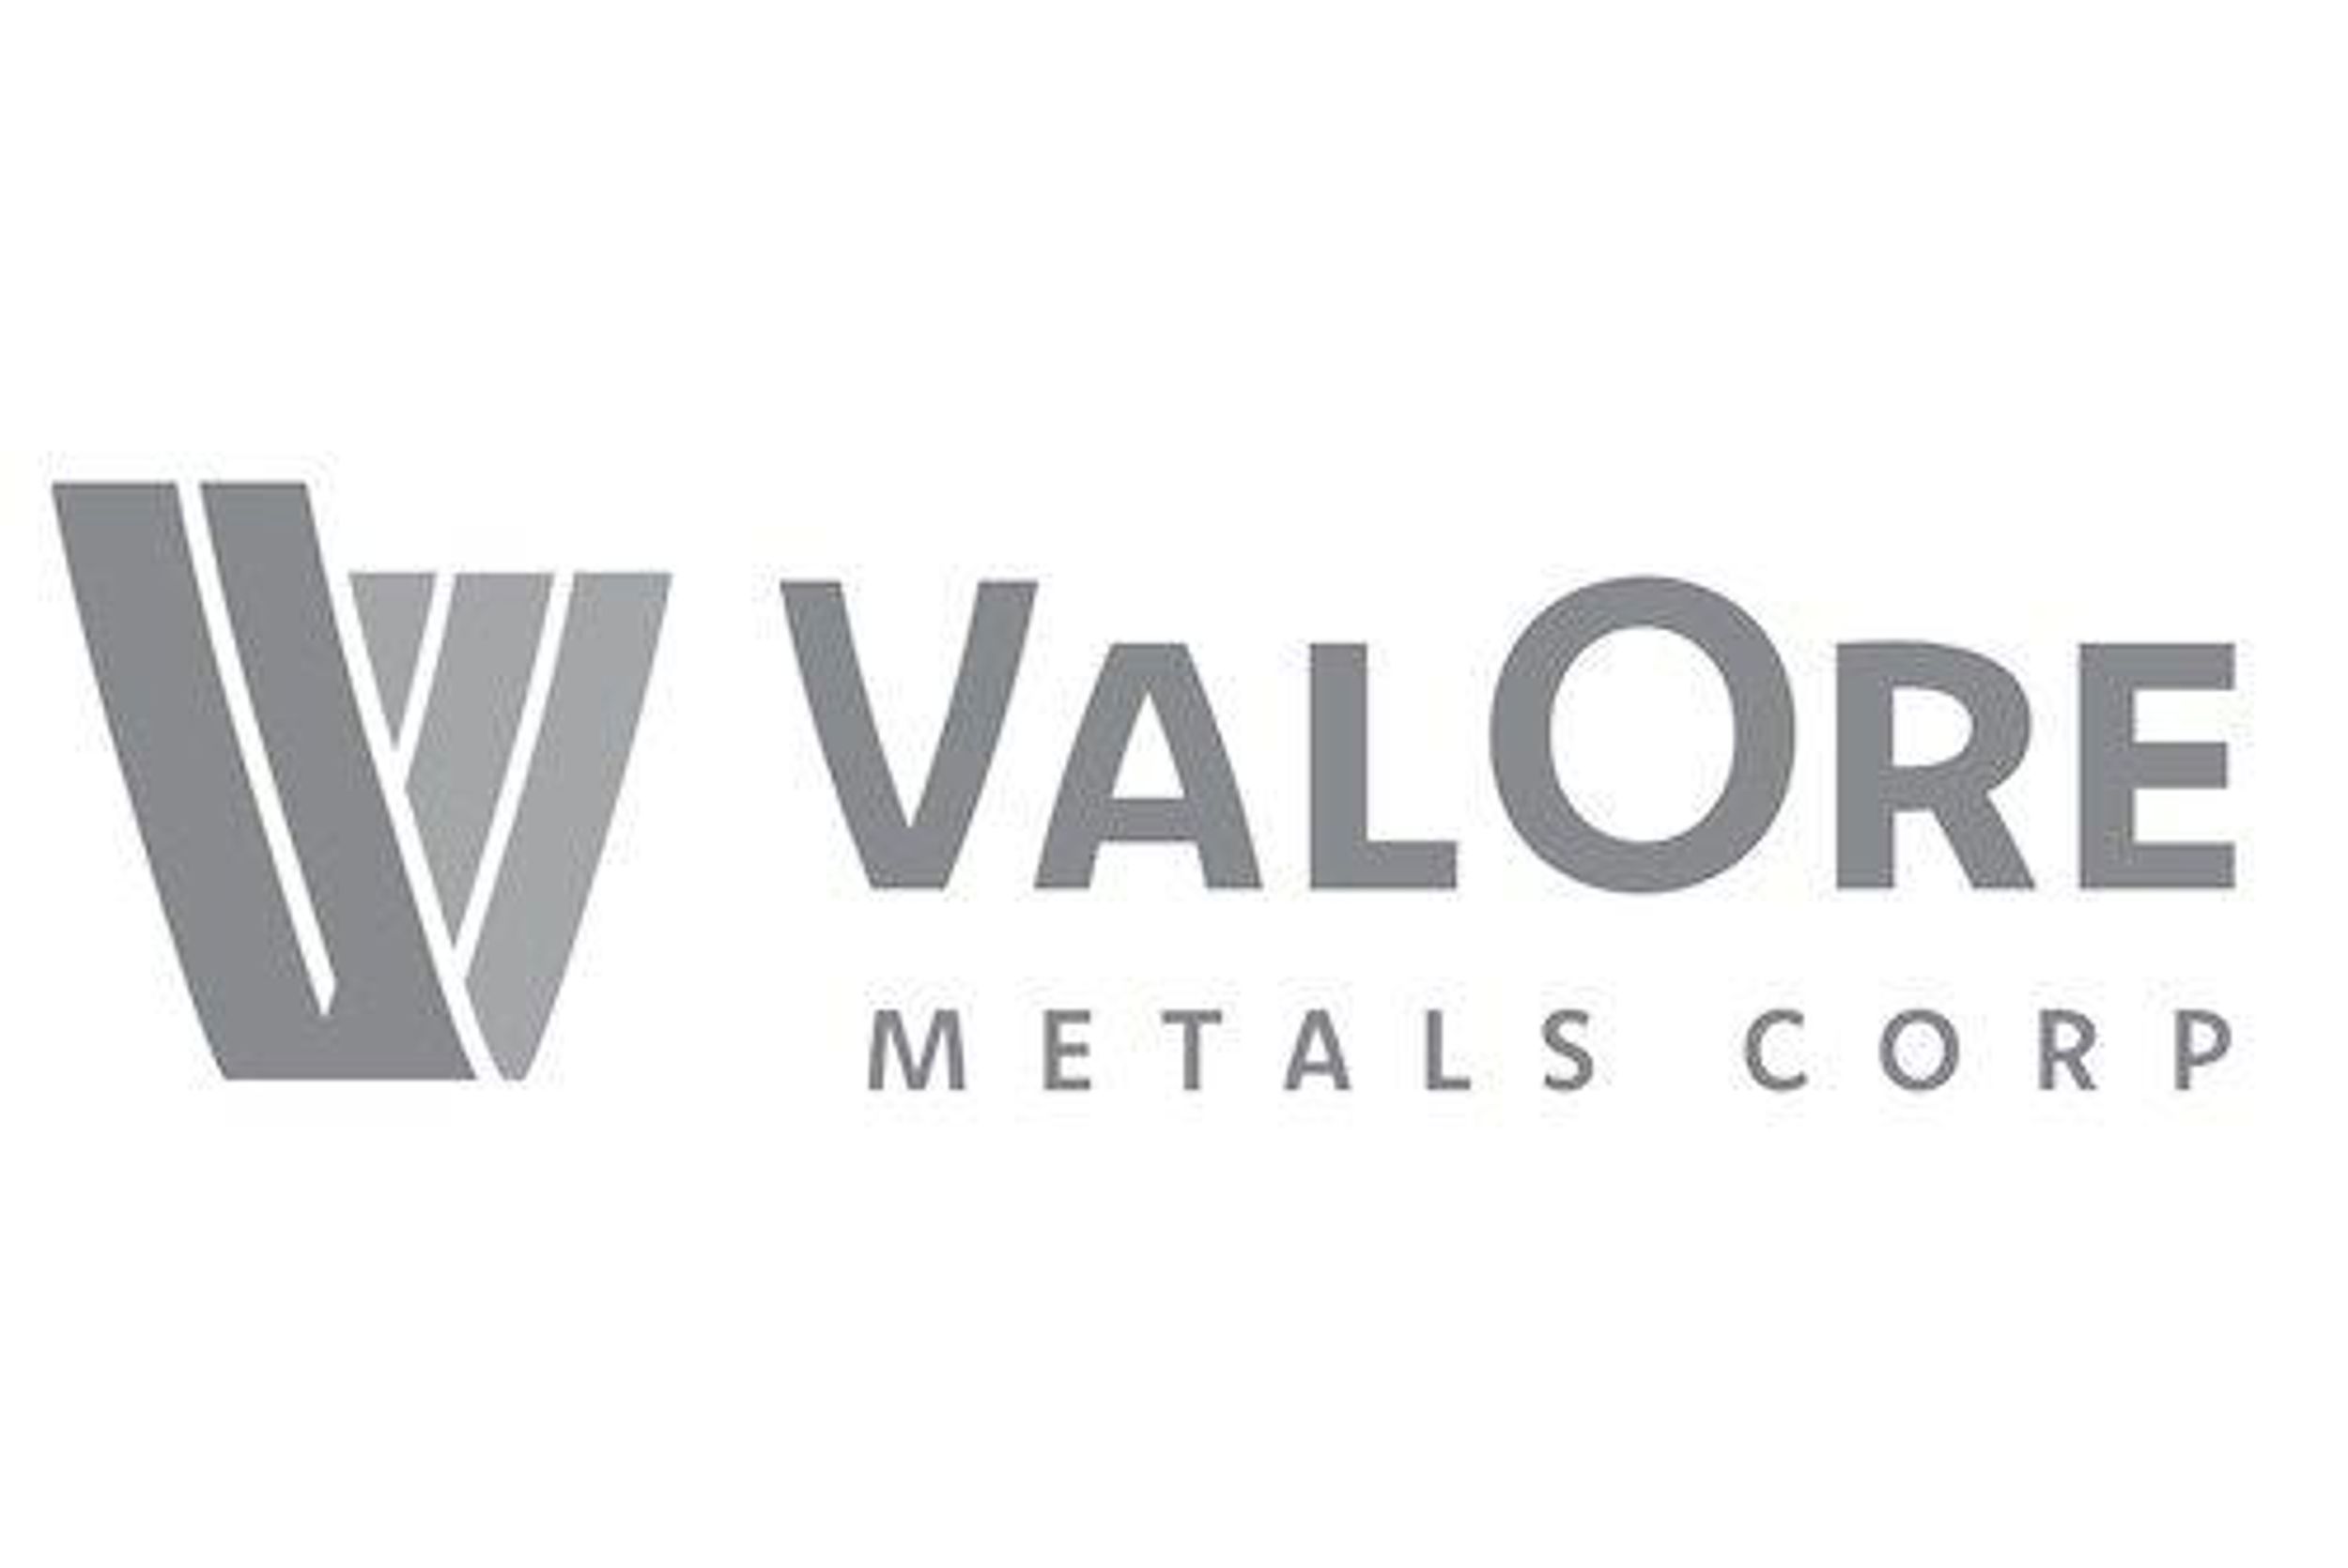 ValOre Drills 53 m at 1.18 g/t 2PGE+Au from Surface at Cedro PGE Deposit